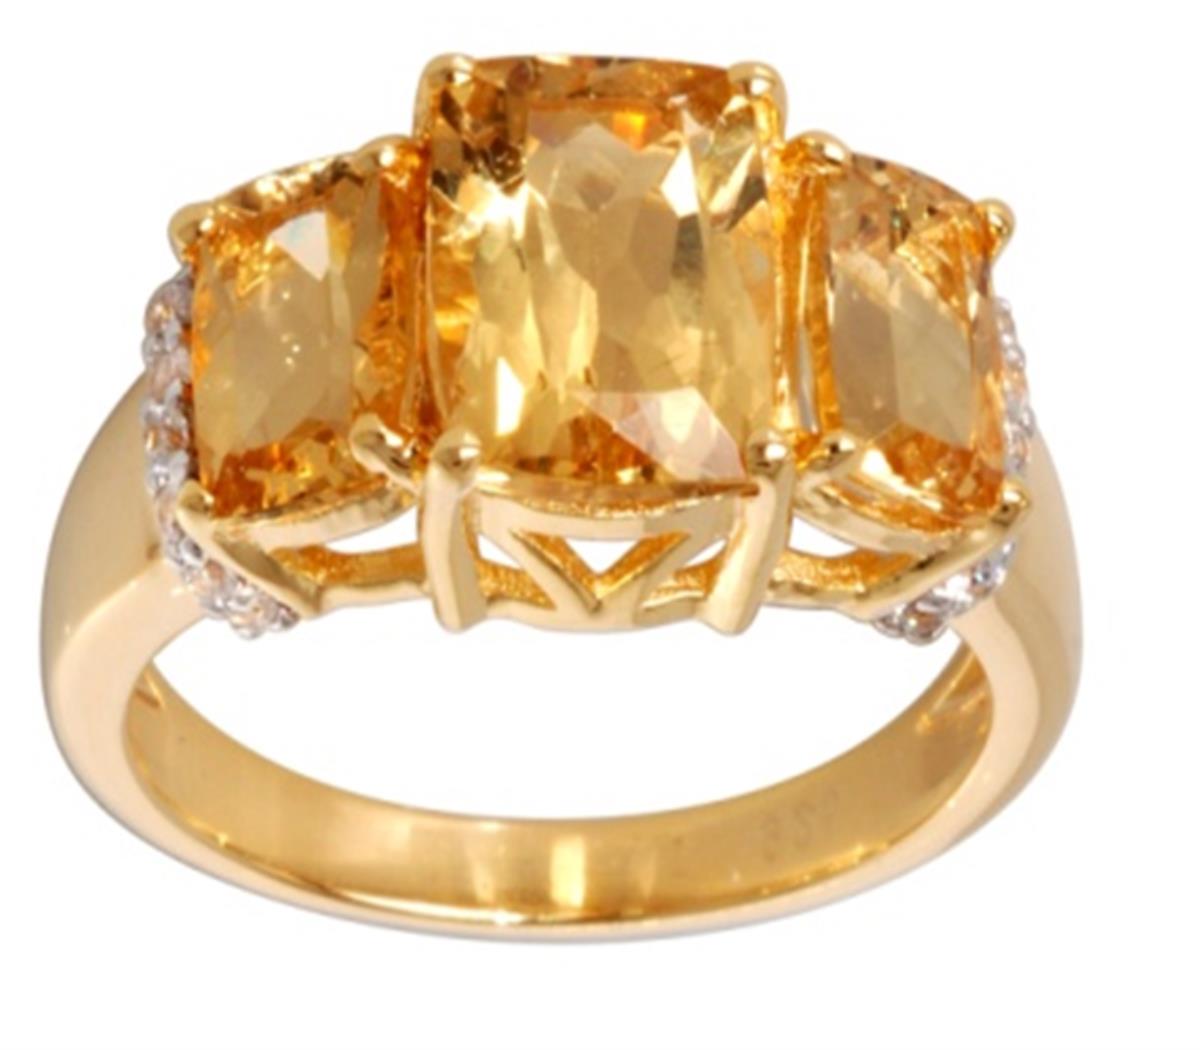 10K Yellow Gold Triple Cushion Shaped Citrine with White Zircon Sides Engagement Ring